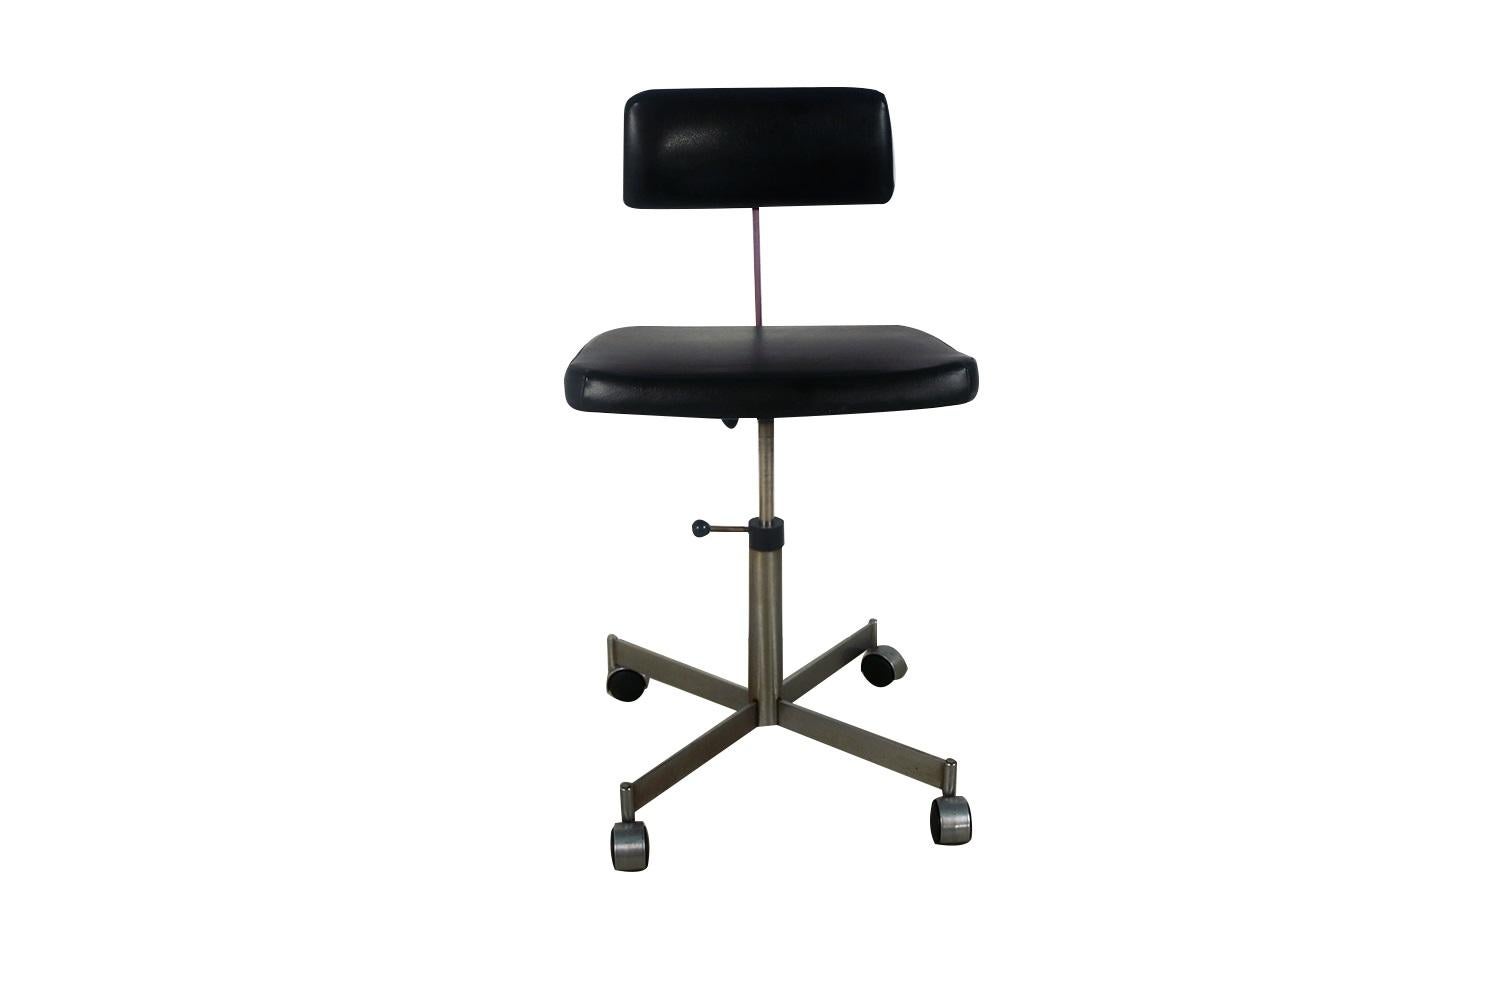 KEVI office chair with double-wheel casters by Jørgen Rasmussen. A Classic Mid-Century Modern office chair, the KEVI was originally designed in 1958 by iconic architect, Jørgen Rasmussen. Designed for the KEVI company this chair was updated 1965